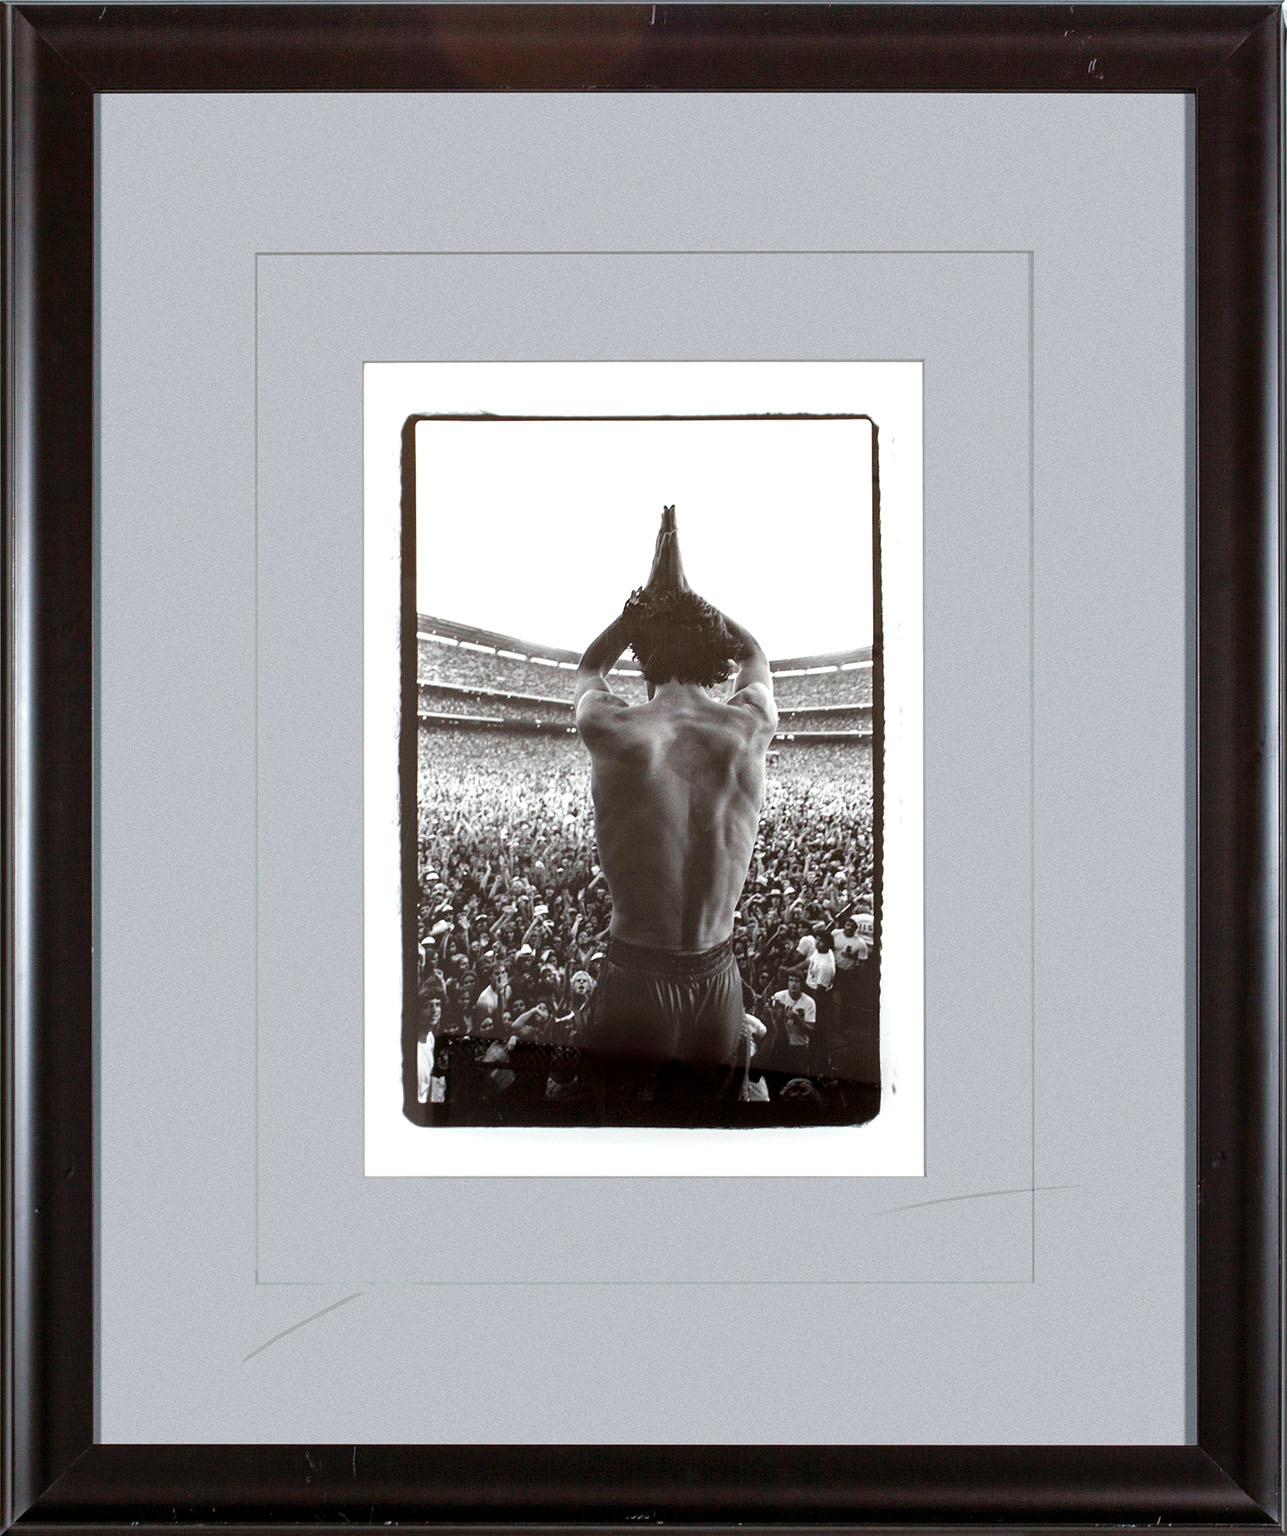 "Mick Jagger 'The Back'" framed black and white photograph by Lynn Goldsmith. Image size: 16 1/2 x 11 inches. This photograph was previously displayed in a guest room of the original Hard Rock Hotel and Casino in Las Vegas, Nevada, and comes with a